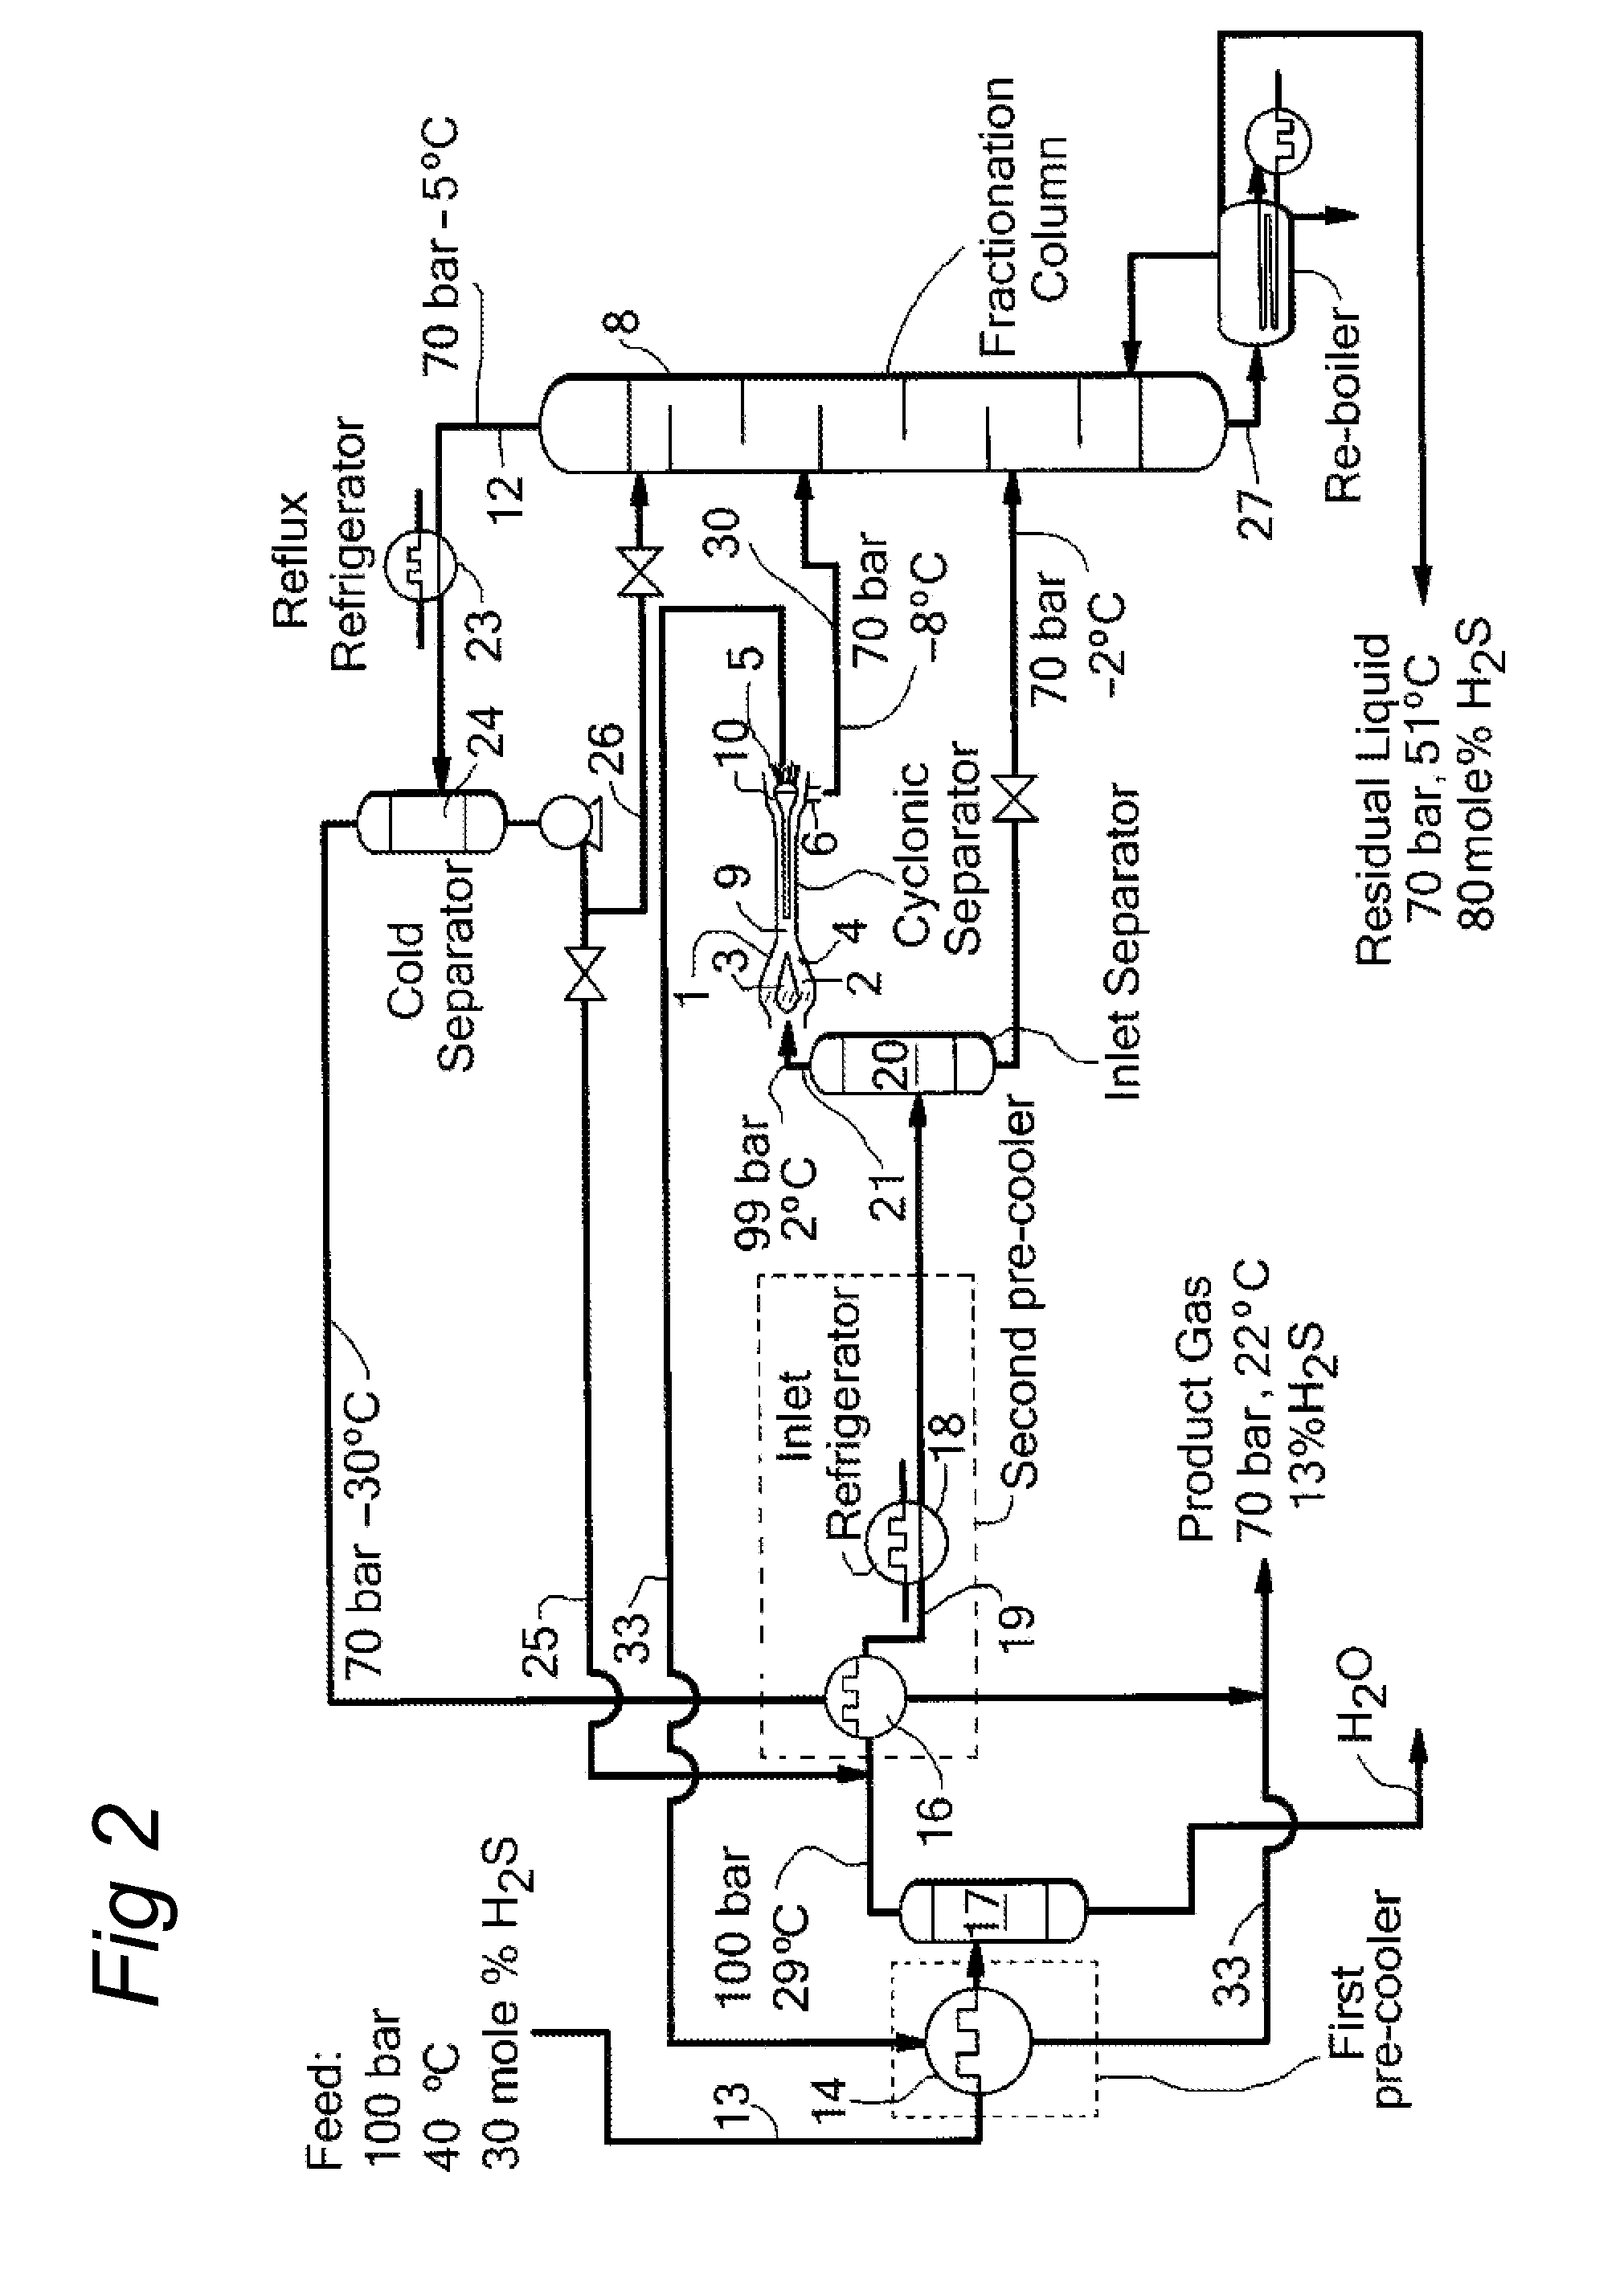 Method and system for removing h2s from a natural gas stream